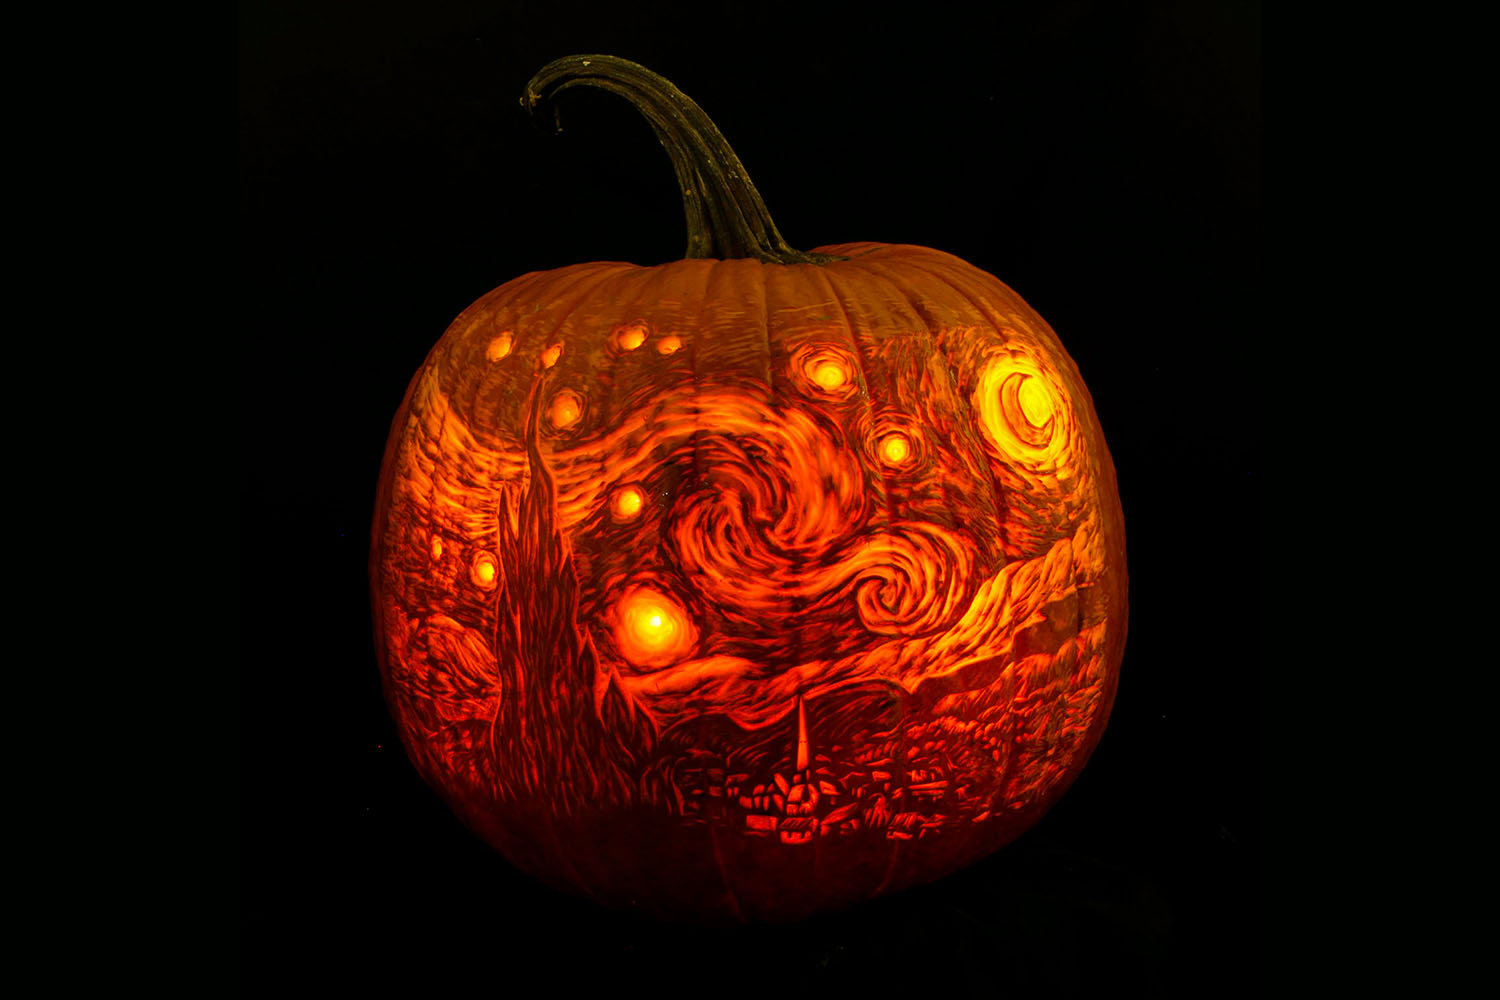 Starry night painting carved into a pumpkin